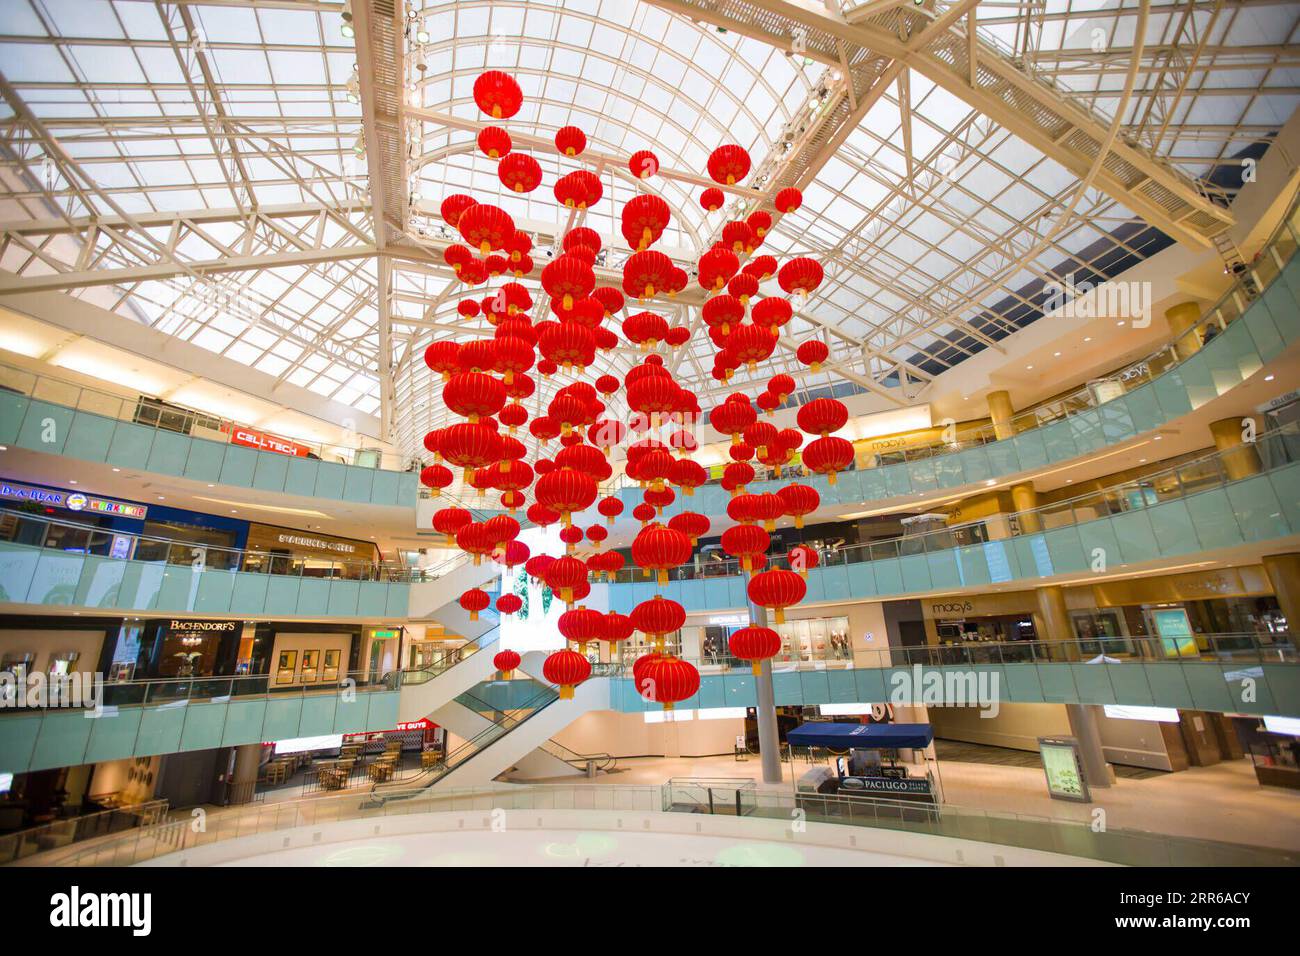 210202 -- DALLAS U.S., Feb. 2, 2021 -- Red lanterns are seen in Galleria Dallas shopping mall in Dallas, Texas, the United States, on Feb. 2, 2021. Over 200 red lanterns, as decorations for the upcoming Chinese Lunar New Year, are hung above the shopping mall s ice skating rink from Feb. 2 to March 2. Photo by /Xinhua U.S.-TEXAS-DALLAS-CHINESE LUNAR NEW YEAR-DECORATIONS DanxTian PUBLICATIONxNOTxINxCHN Stock Photo